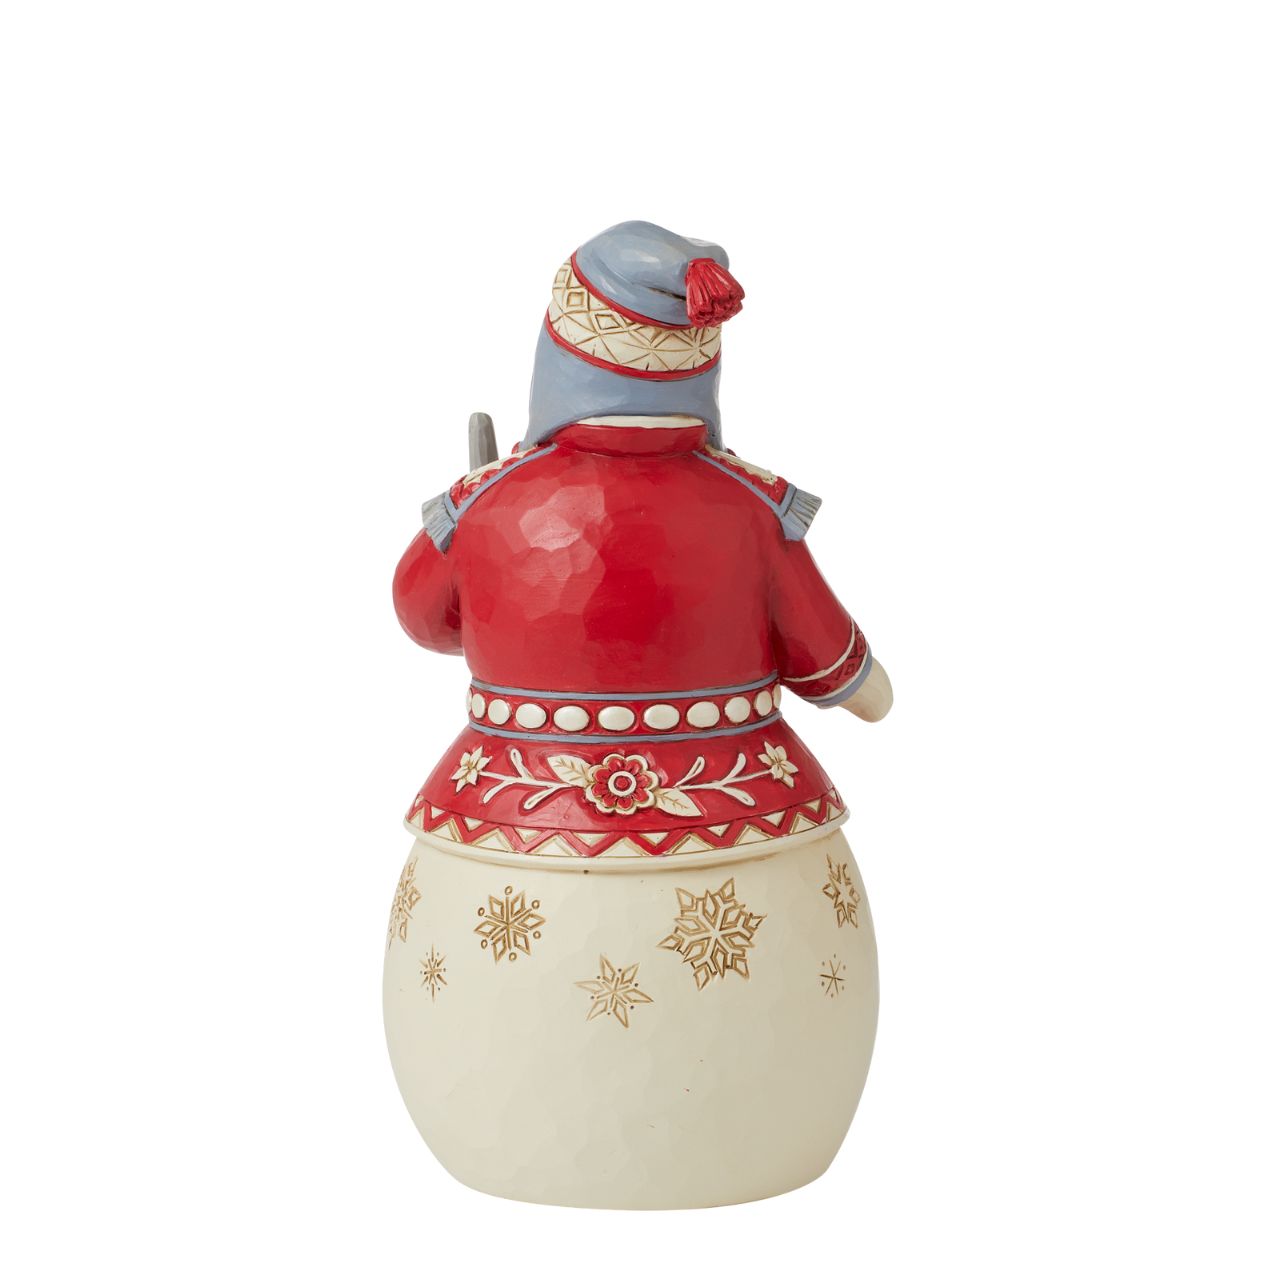 Nordic Noel Snowman Figurine  The Nordic Noel Collection showcases a modern twist on Jim Shores whimsical designs; Contrasting red and white colours in Scandinavian patterns, turkey red and Danish architectural trim.